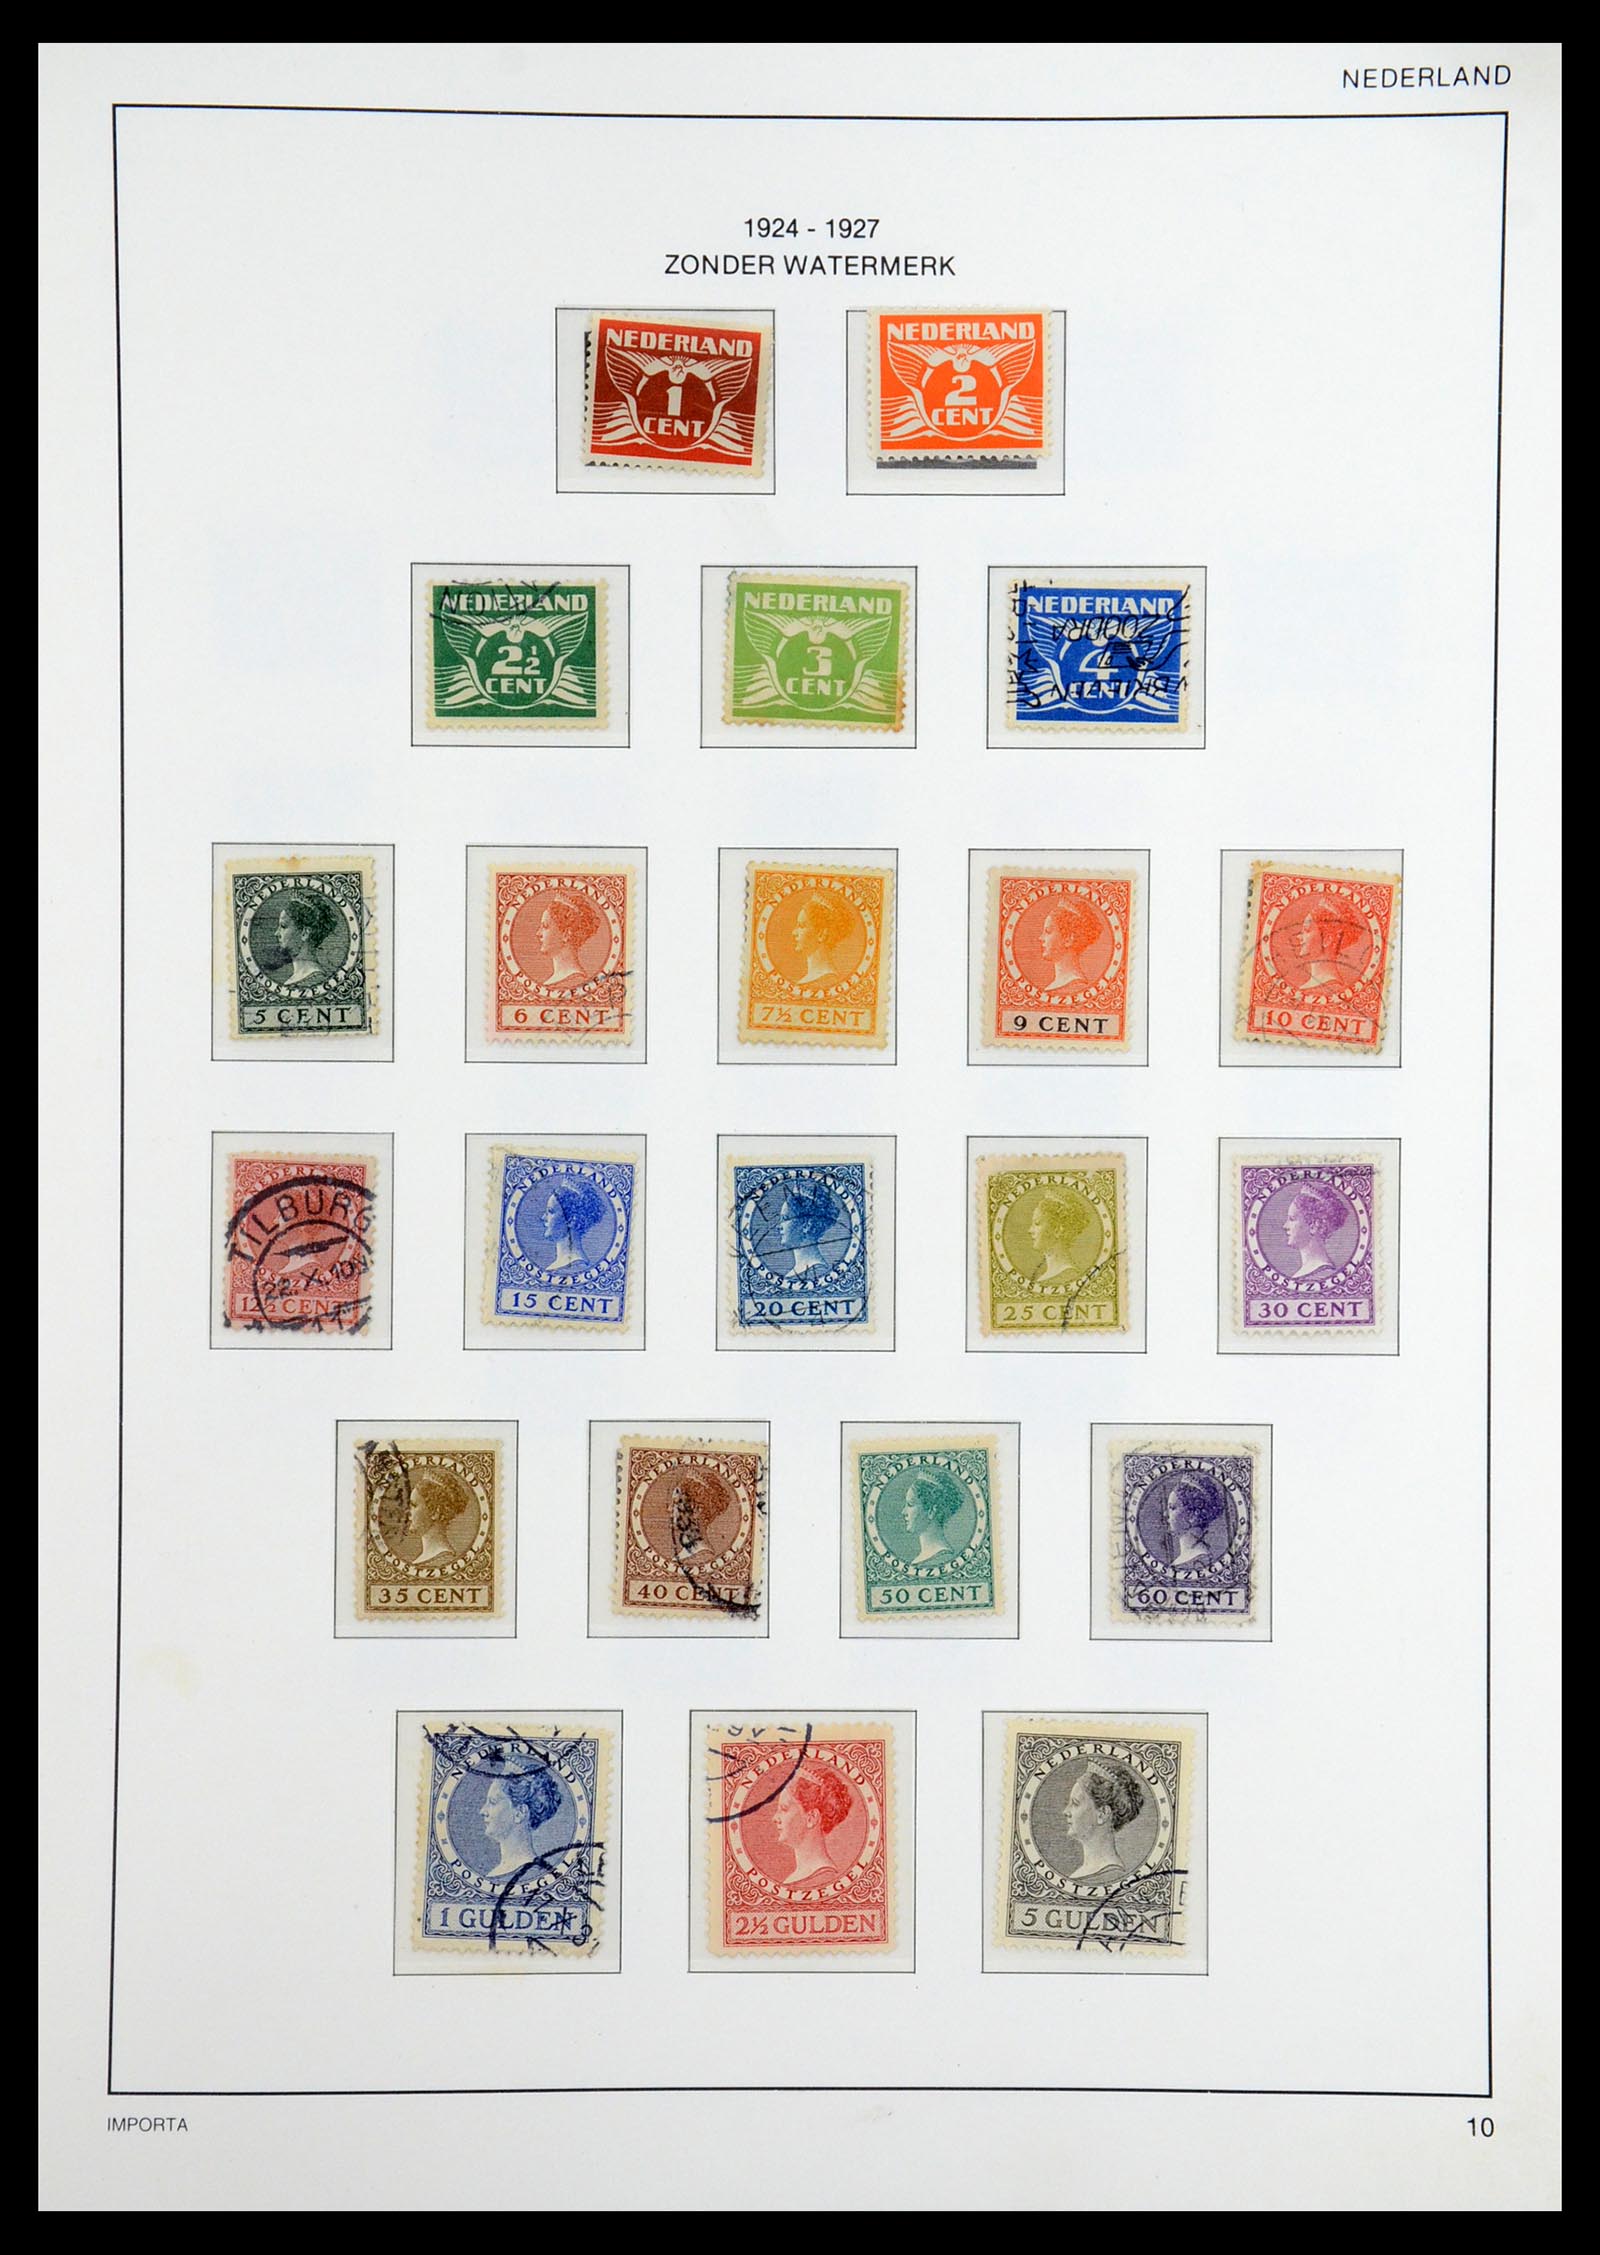 36544 011 - Stamp collection 36544 Netherlands 1852-1958.